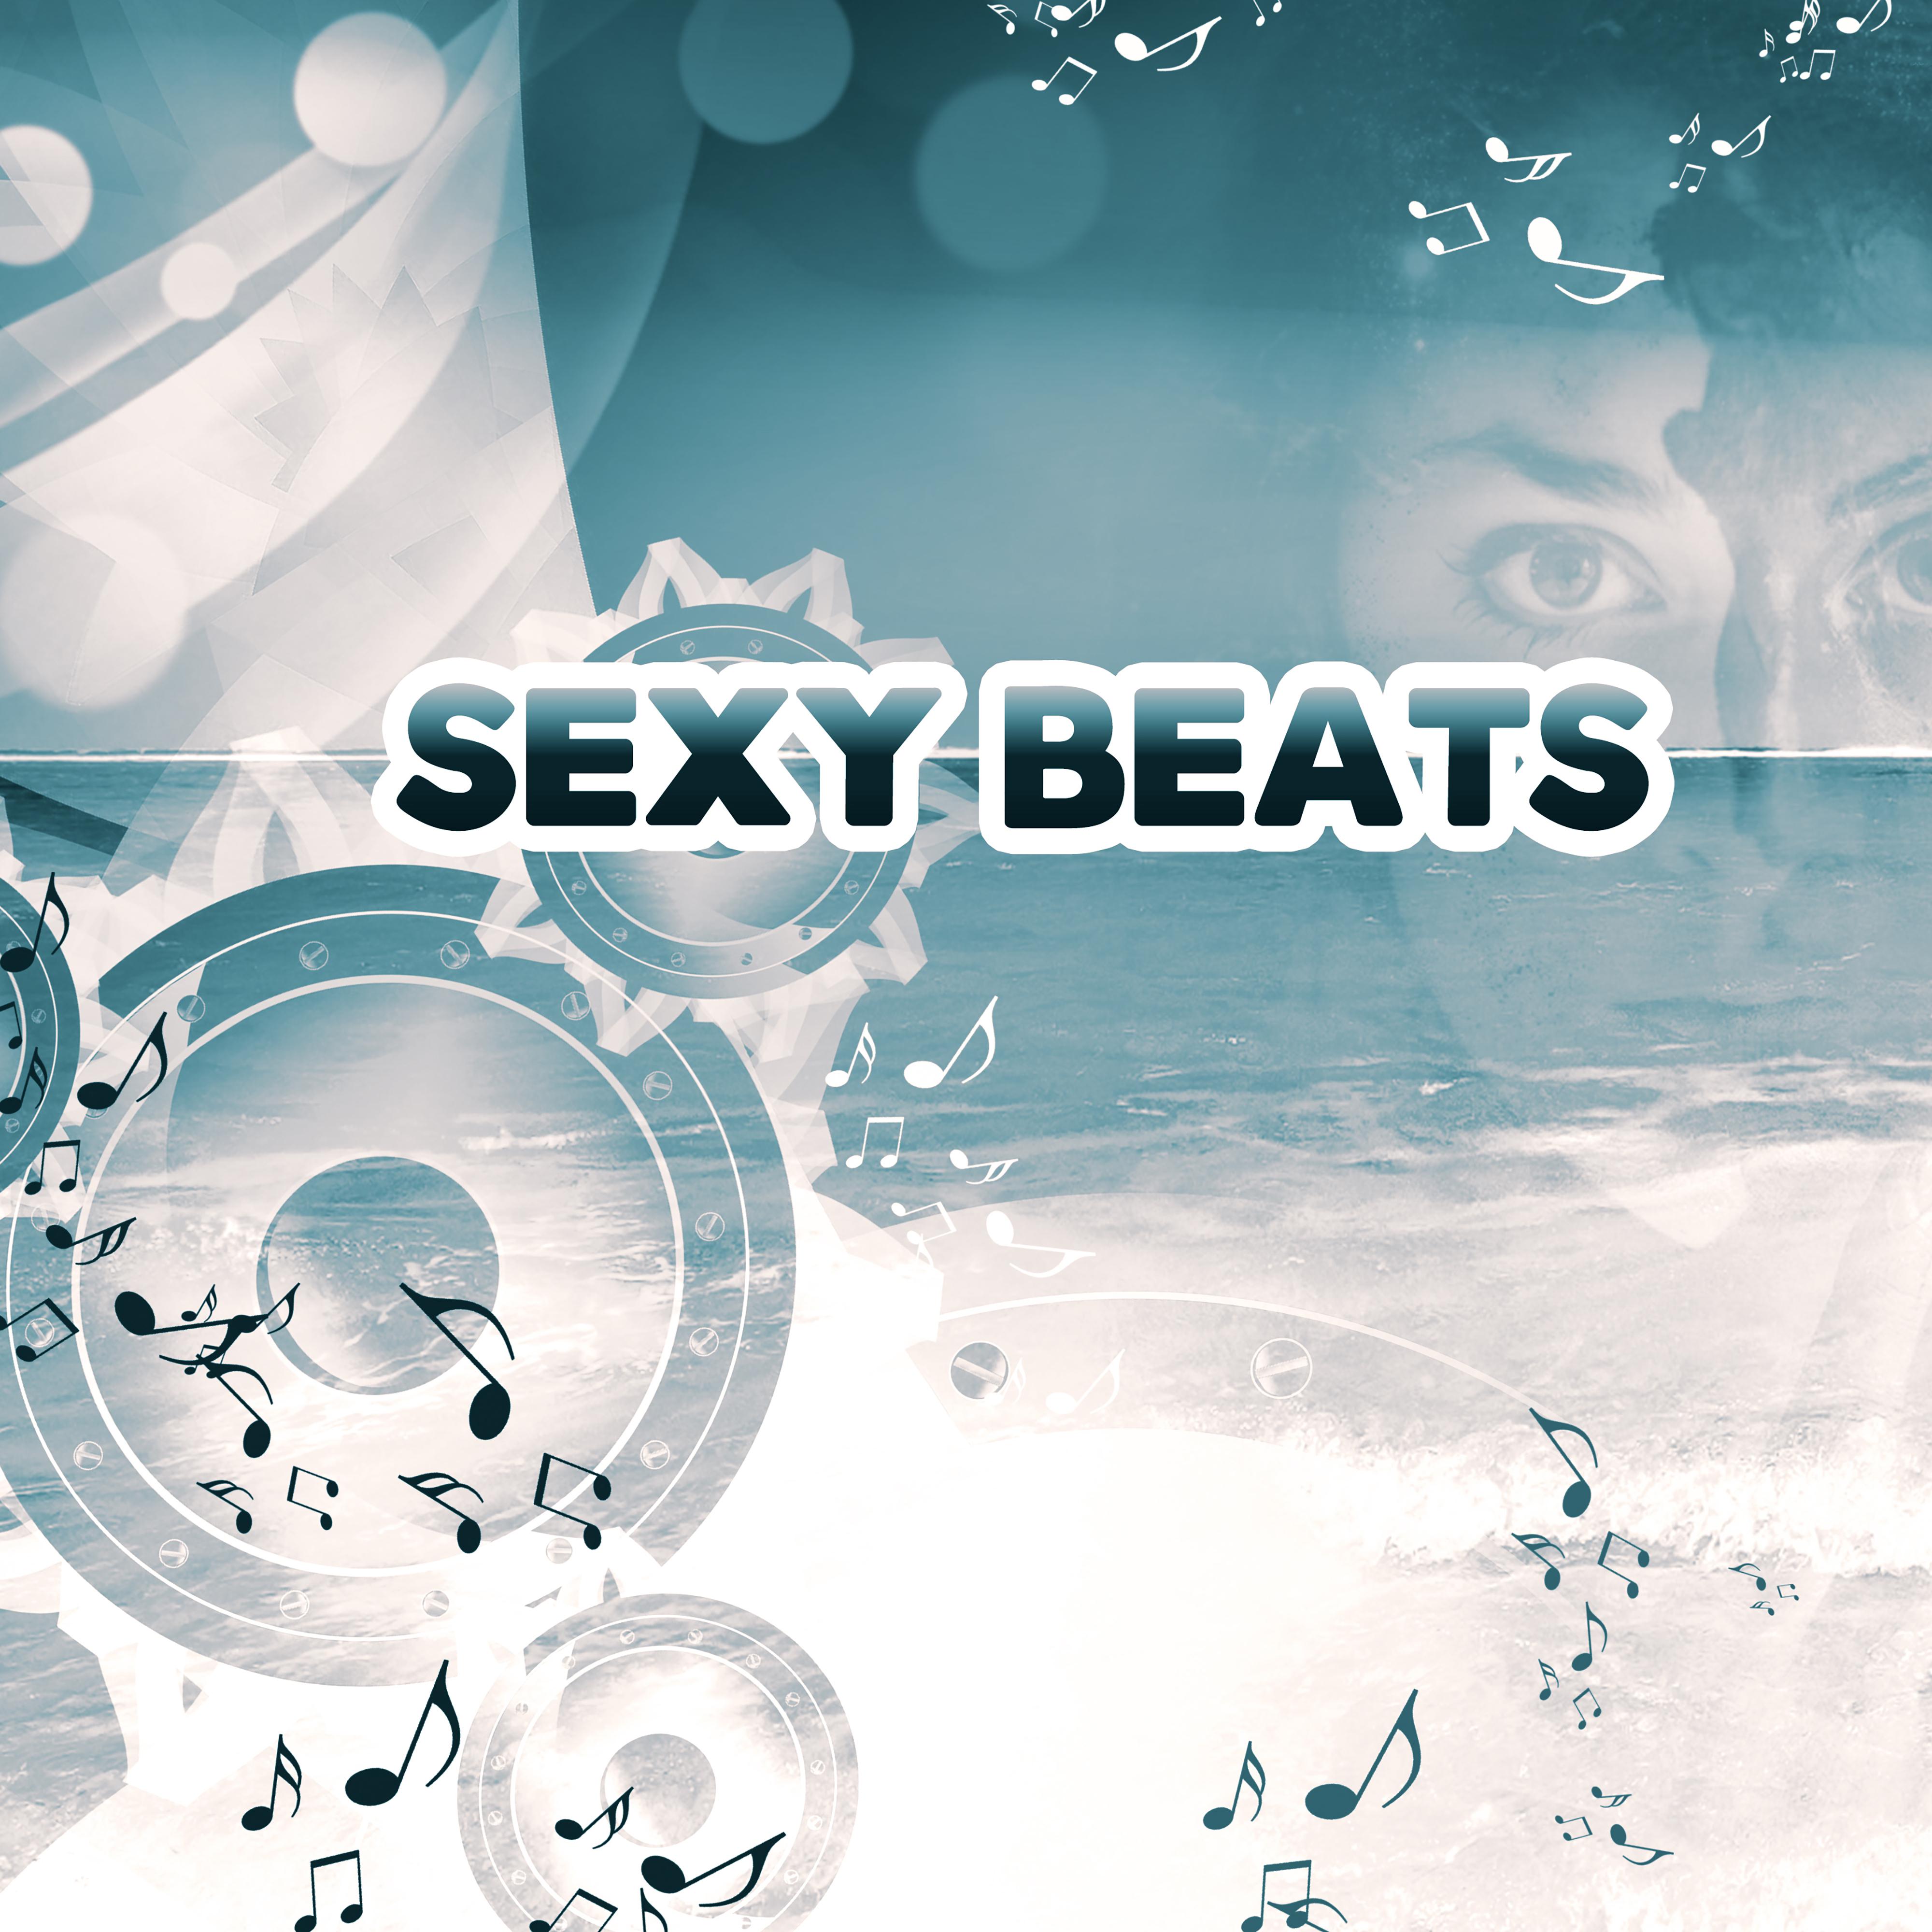 **** Beats – Chillout Music, Cocktail Lounge, Ibiza Chillout, Holiday Songs, Crazy Time, Beach Party, Summertime